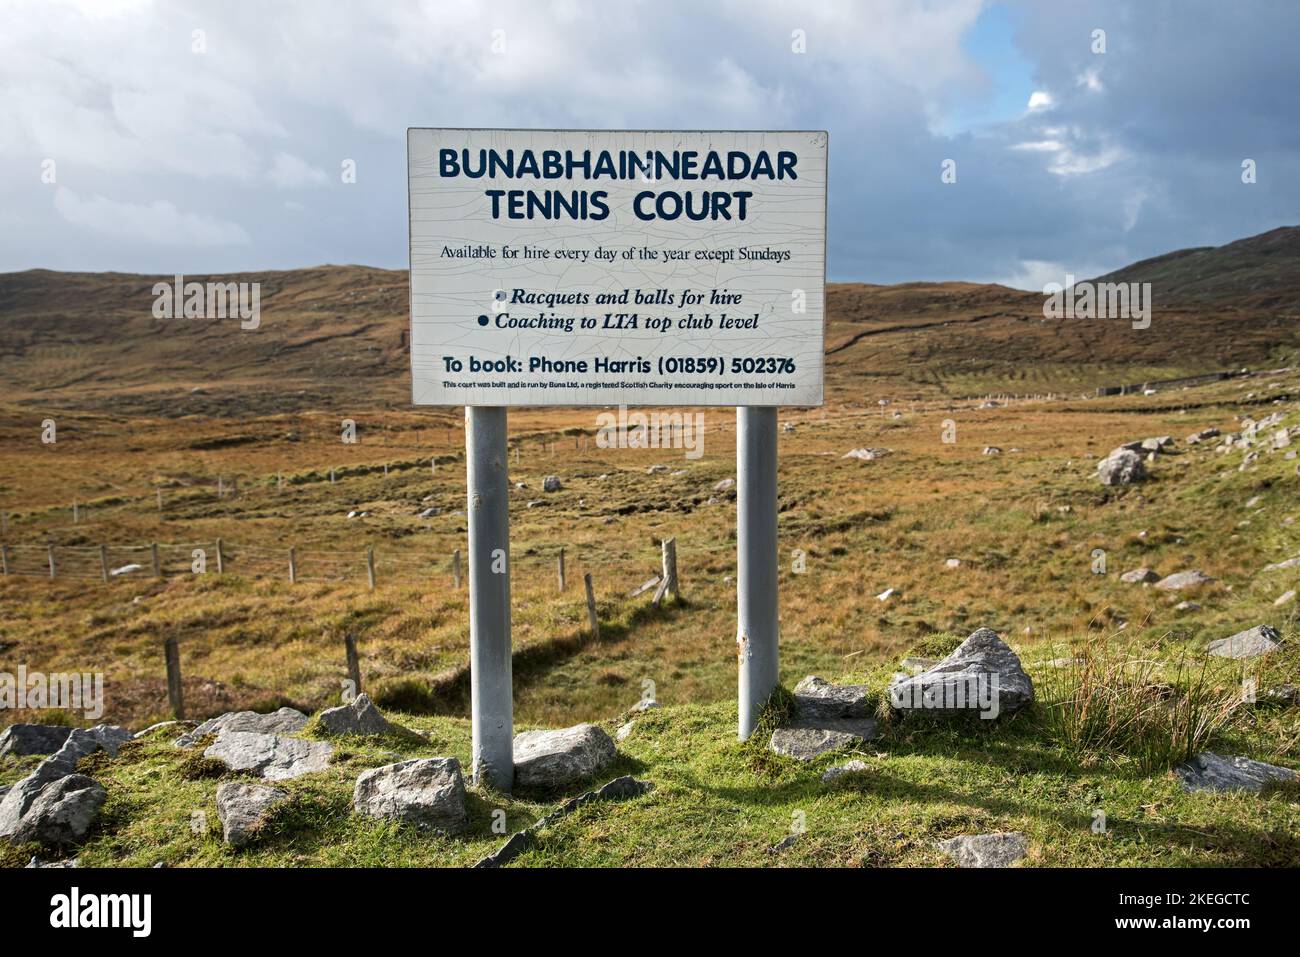 Bunabhainneadar tennis court, the UK's most remore tennis court on the Isle of Harris in the Outer Hebrides, Scotland, UK. Stock Photo